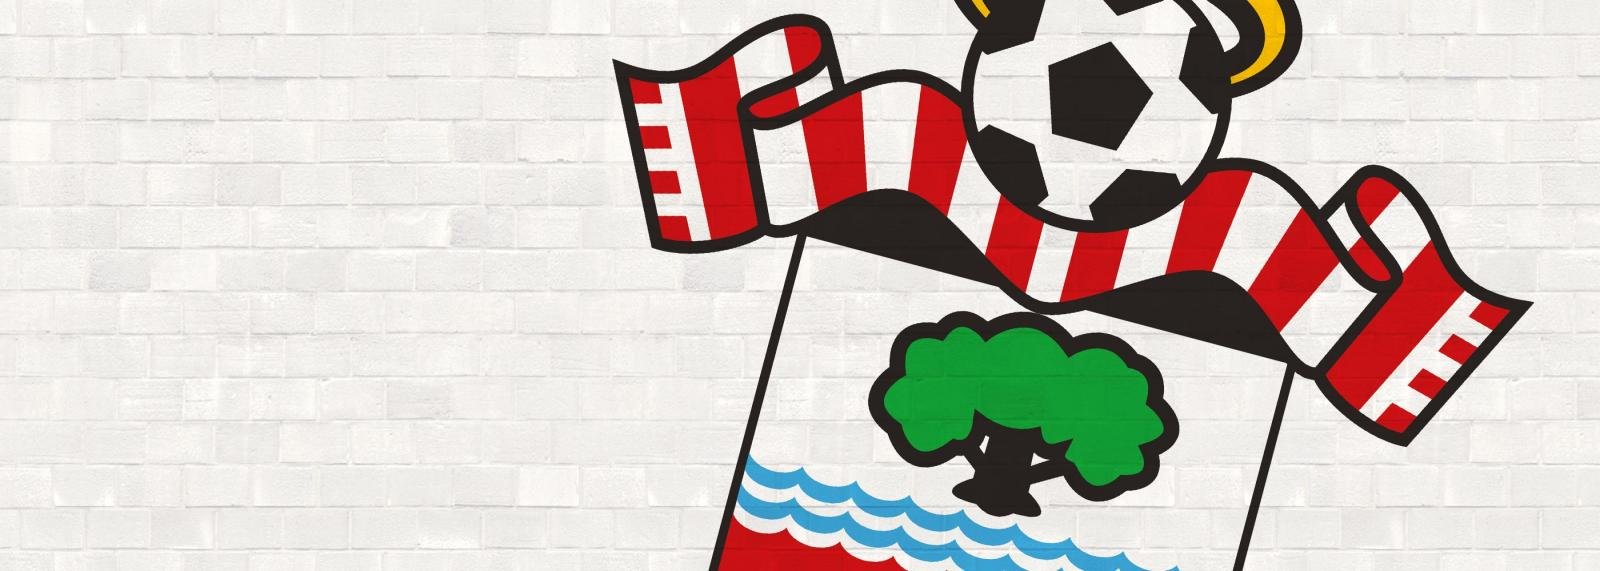 Southampton fans’ forum a missed opportunity